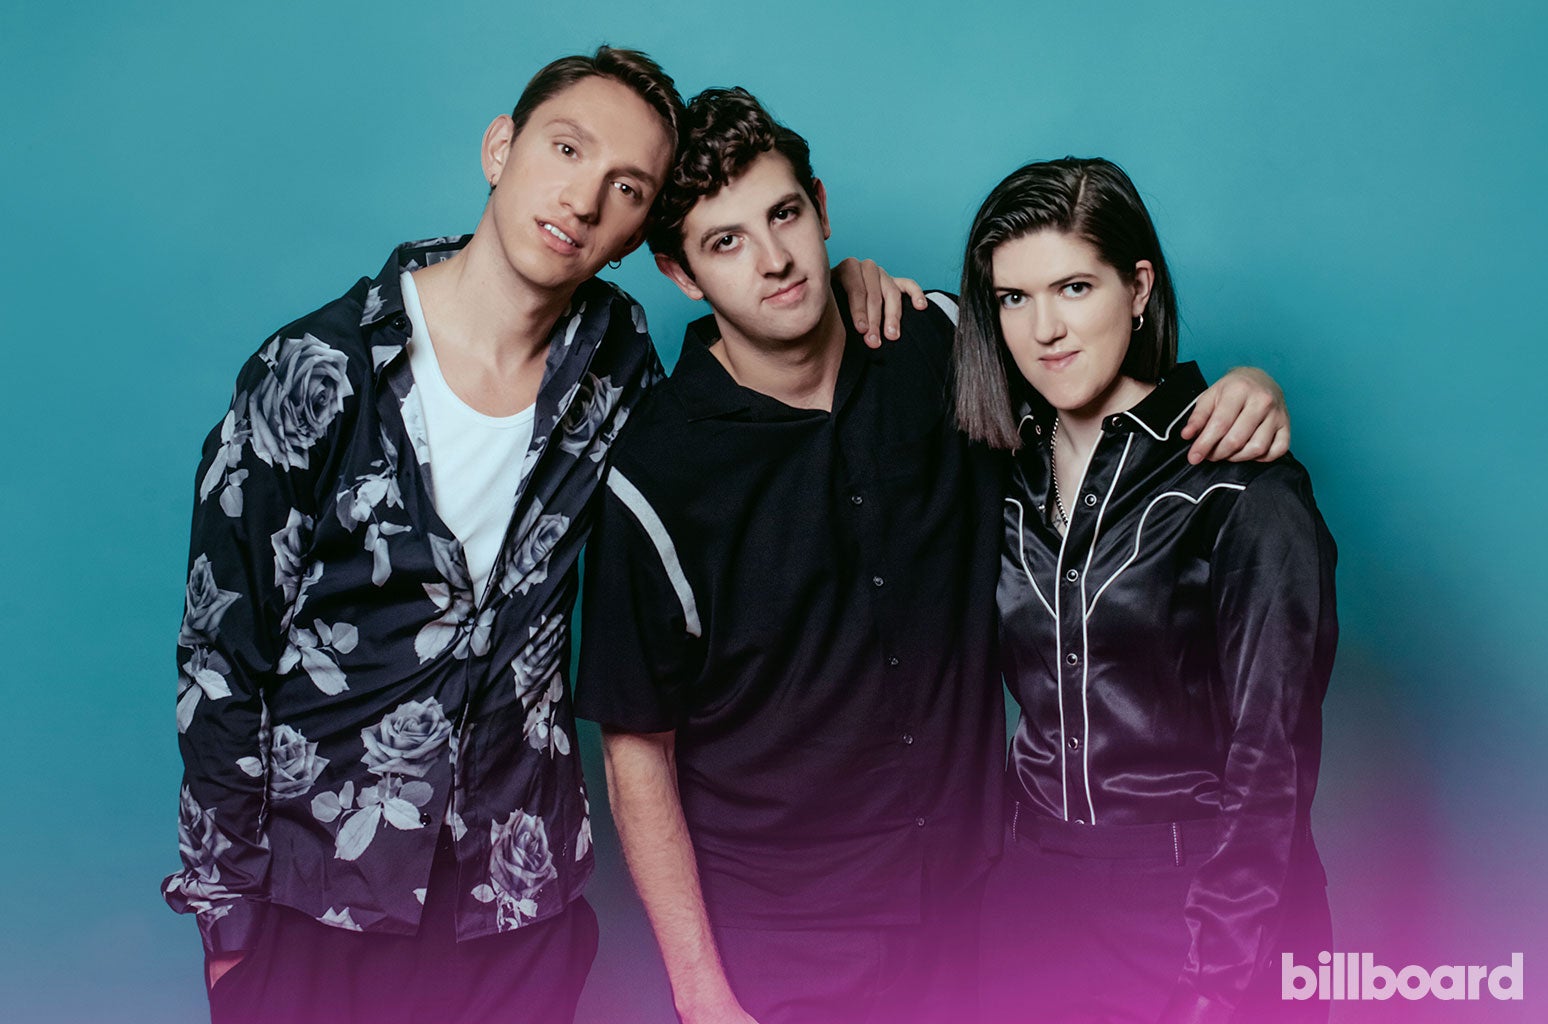 Malaysians are 'X-cited' Over The xx Upcoming Concert in KL Next January! - WORLD OF BUZZ